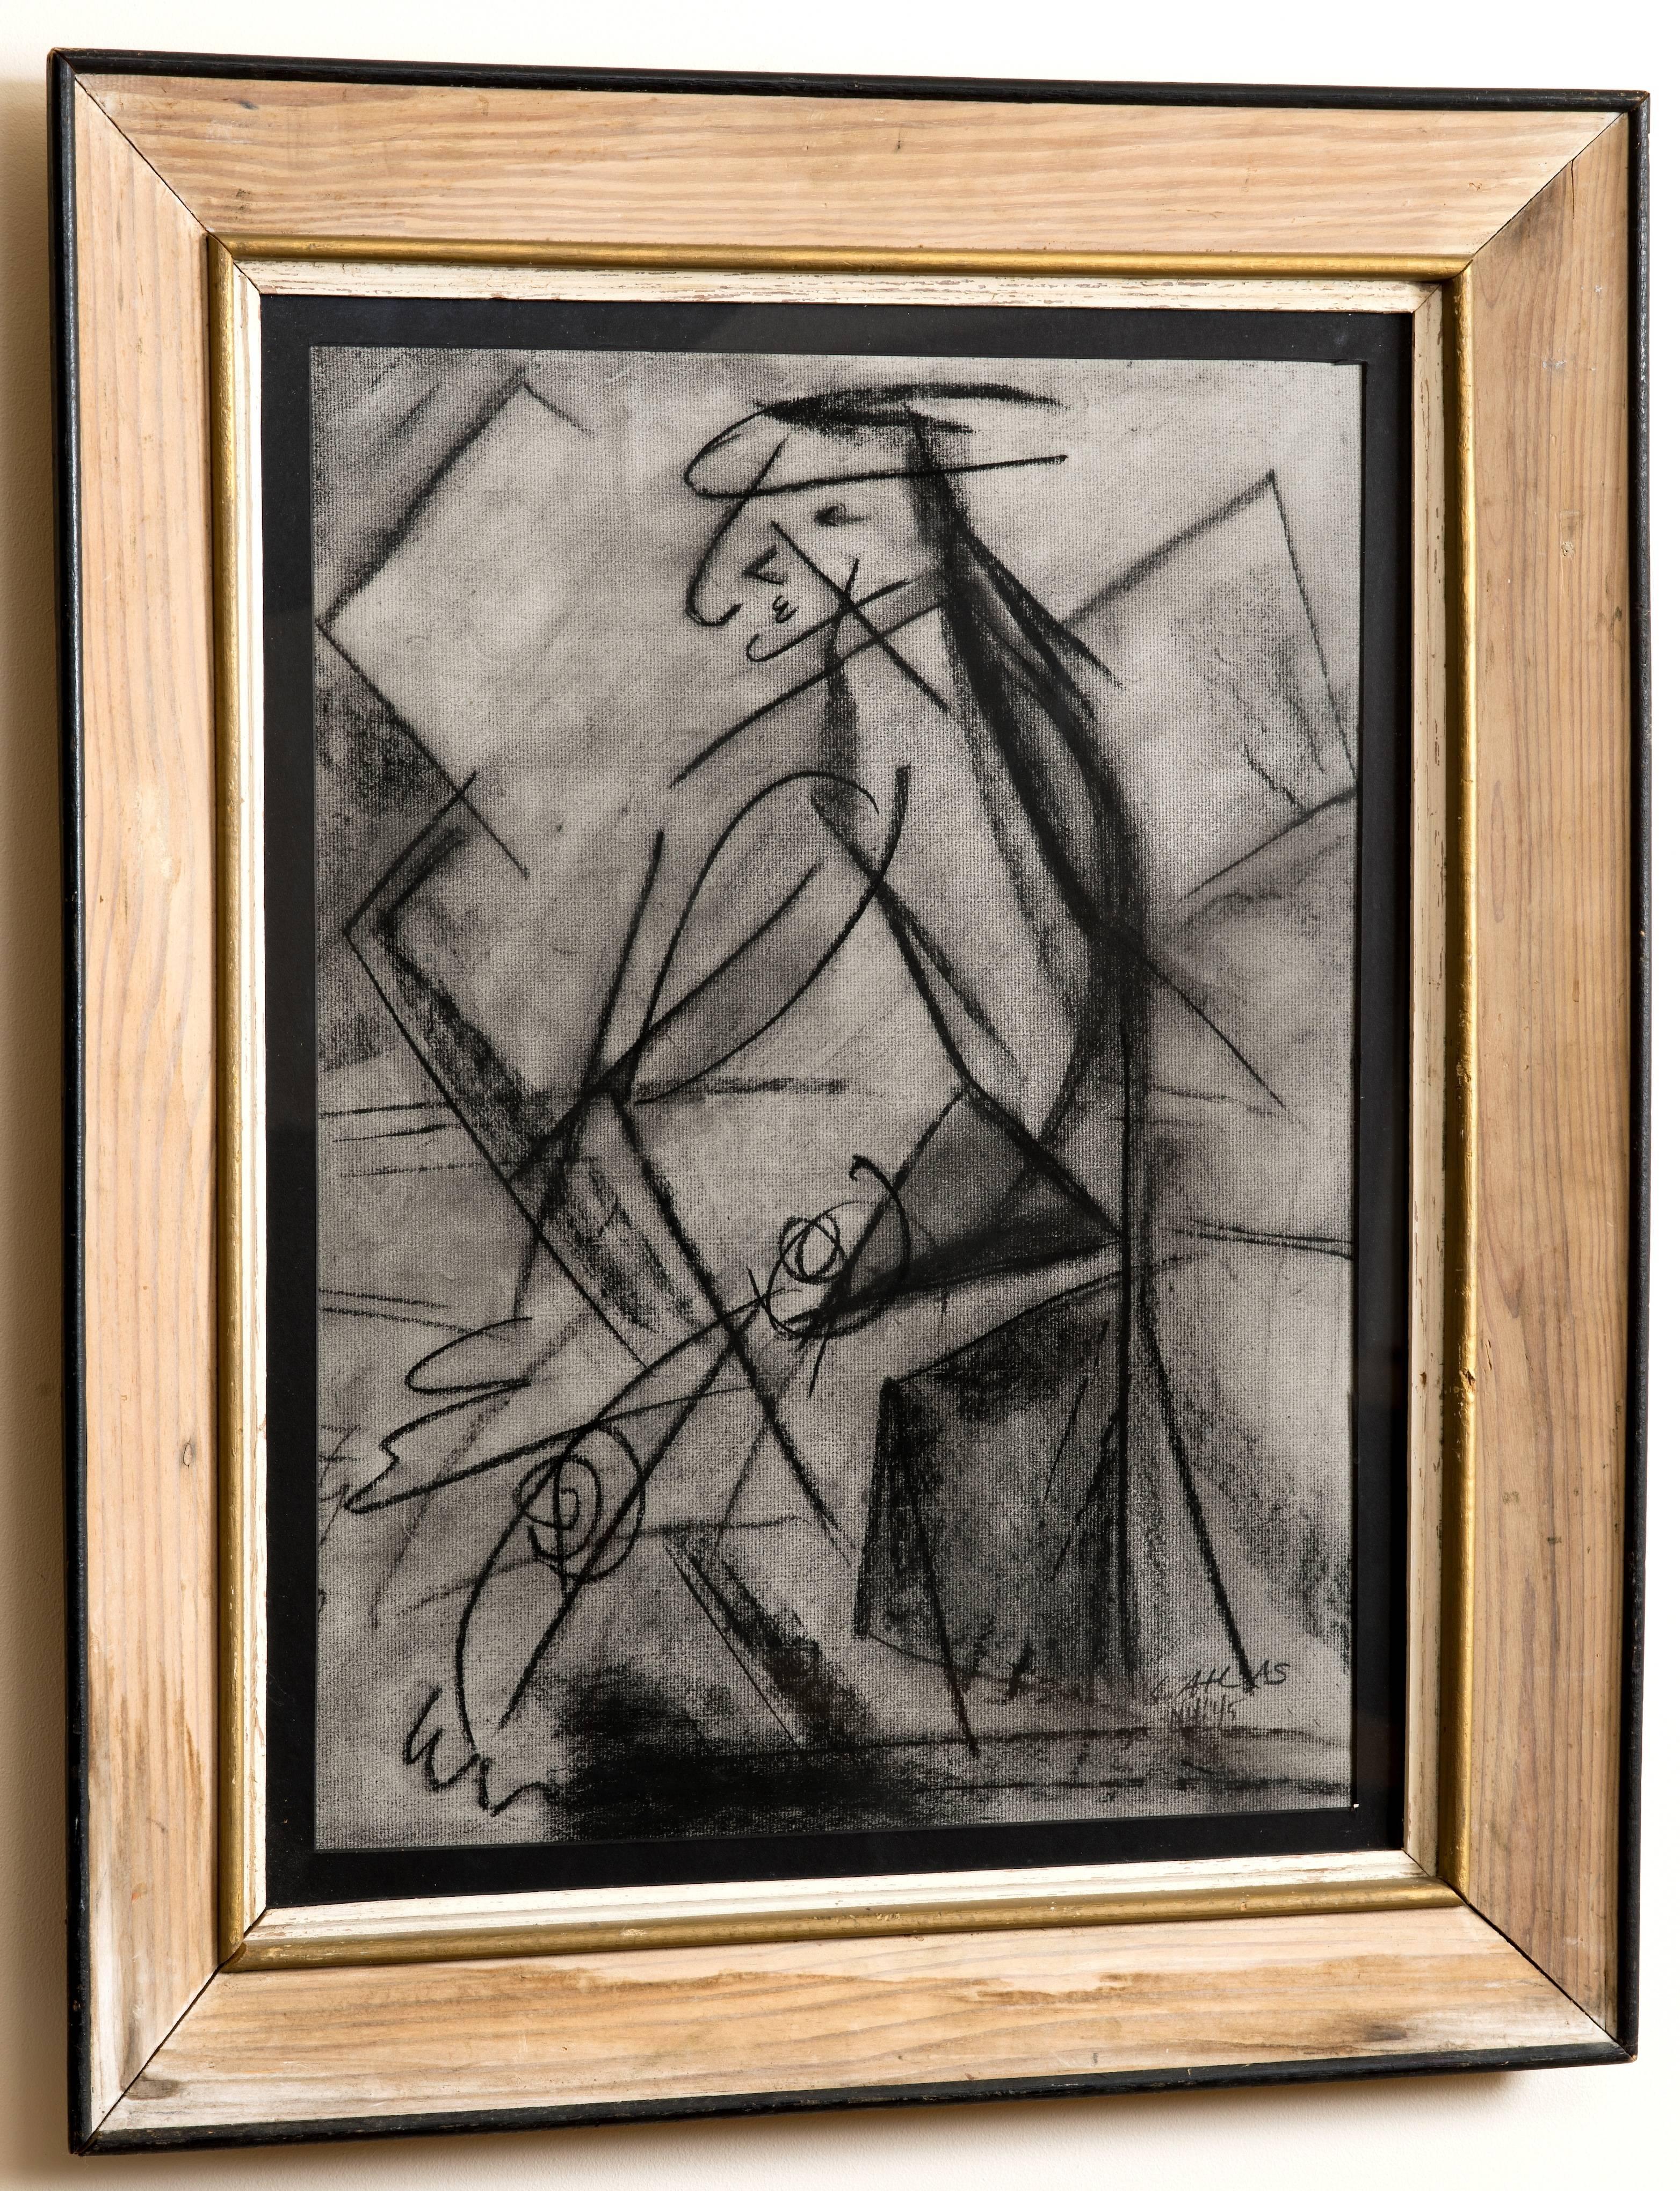 American Charcoal Figural Drawing circa 1945 by Louis Atlas